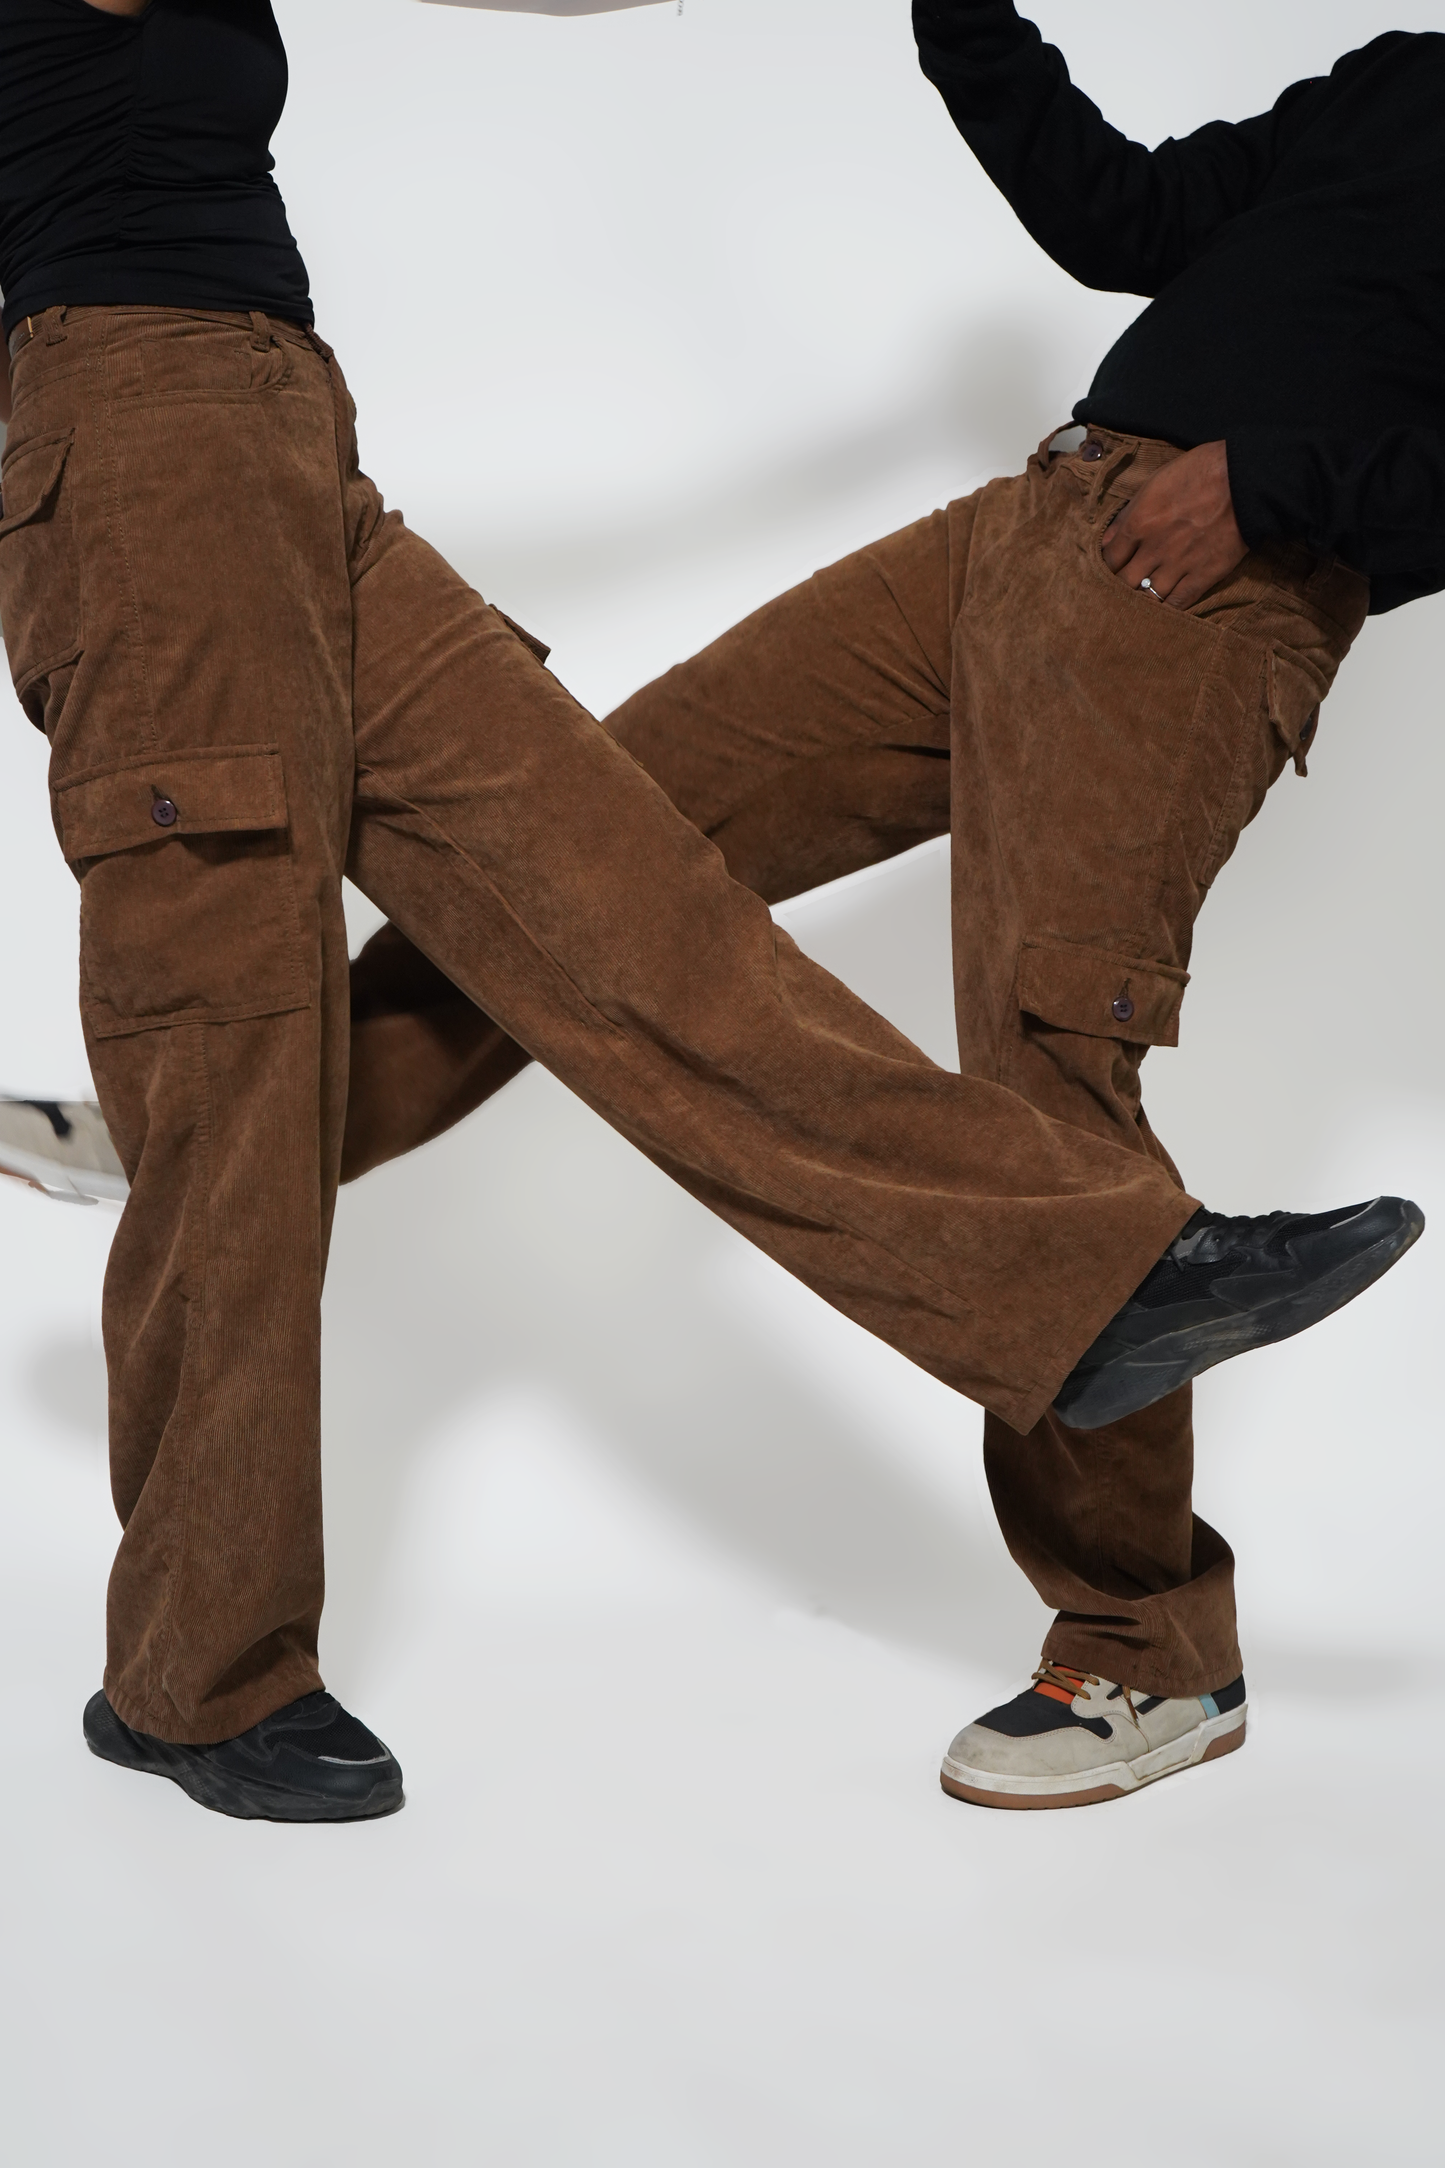 The Corduroy Collection